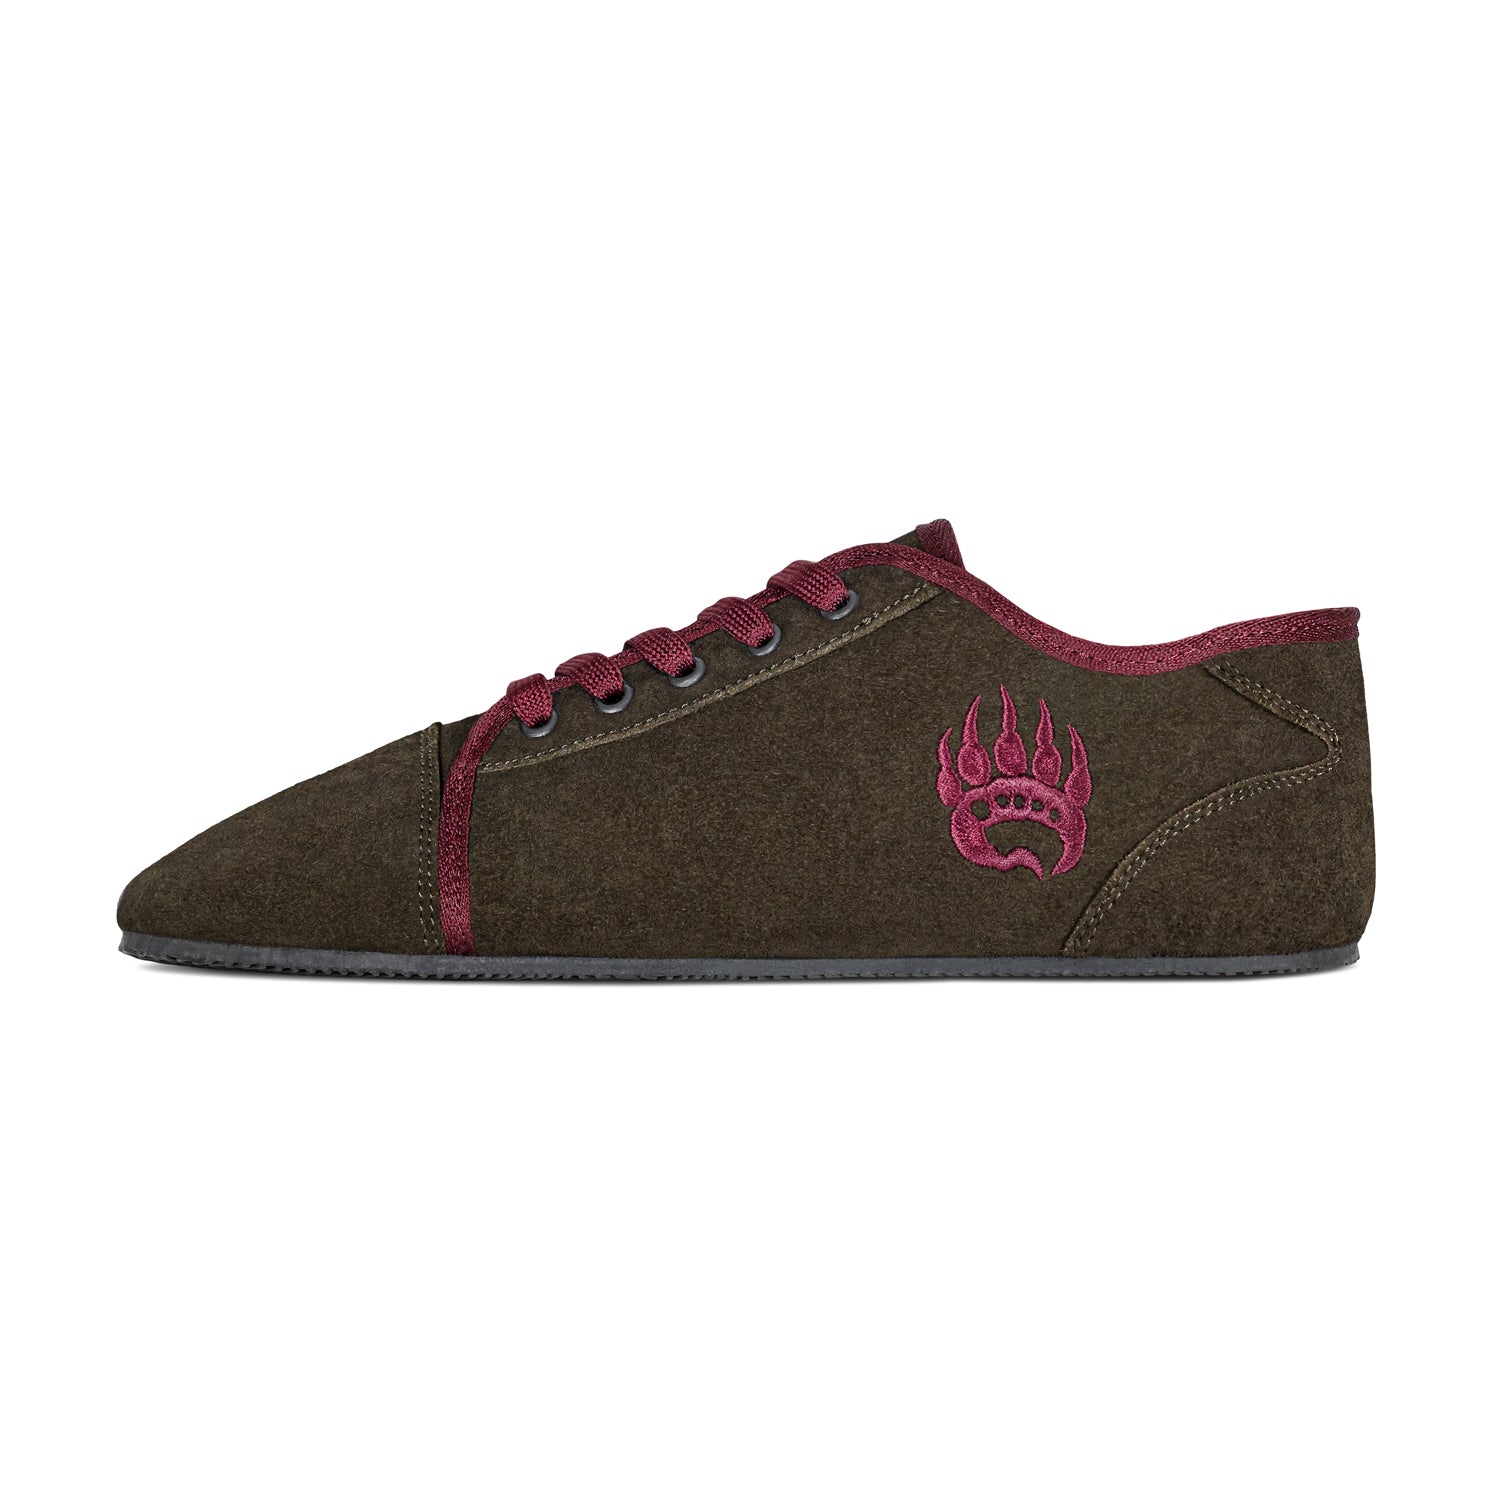 Side view of a Bearfoot Ursus Suede training sneaker in Mystic Moss with burgundy laces and a stylized burgundy paw print design on the side. This shoe, crafted from genuine suede leather, has a